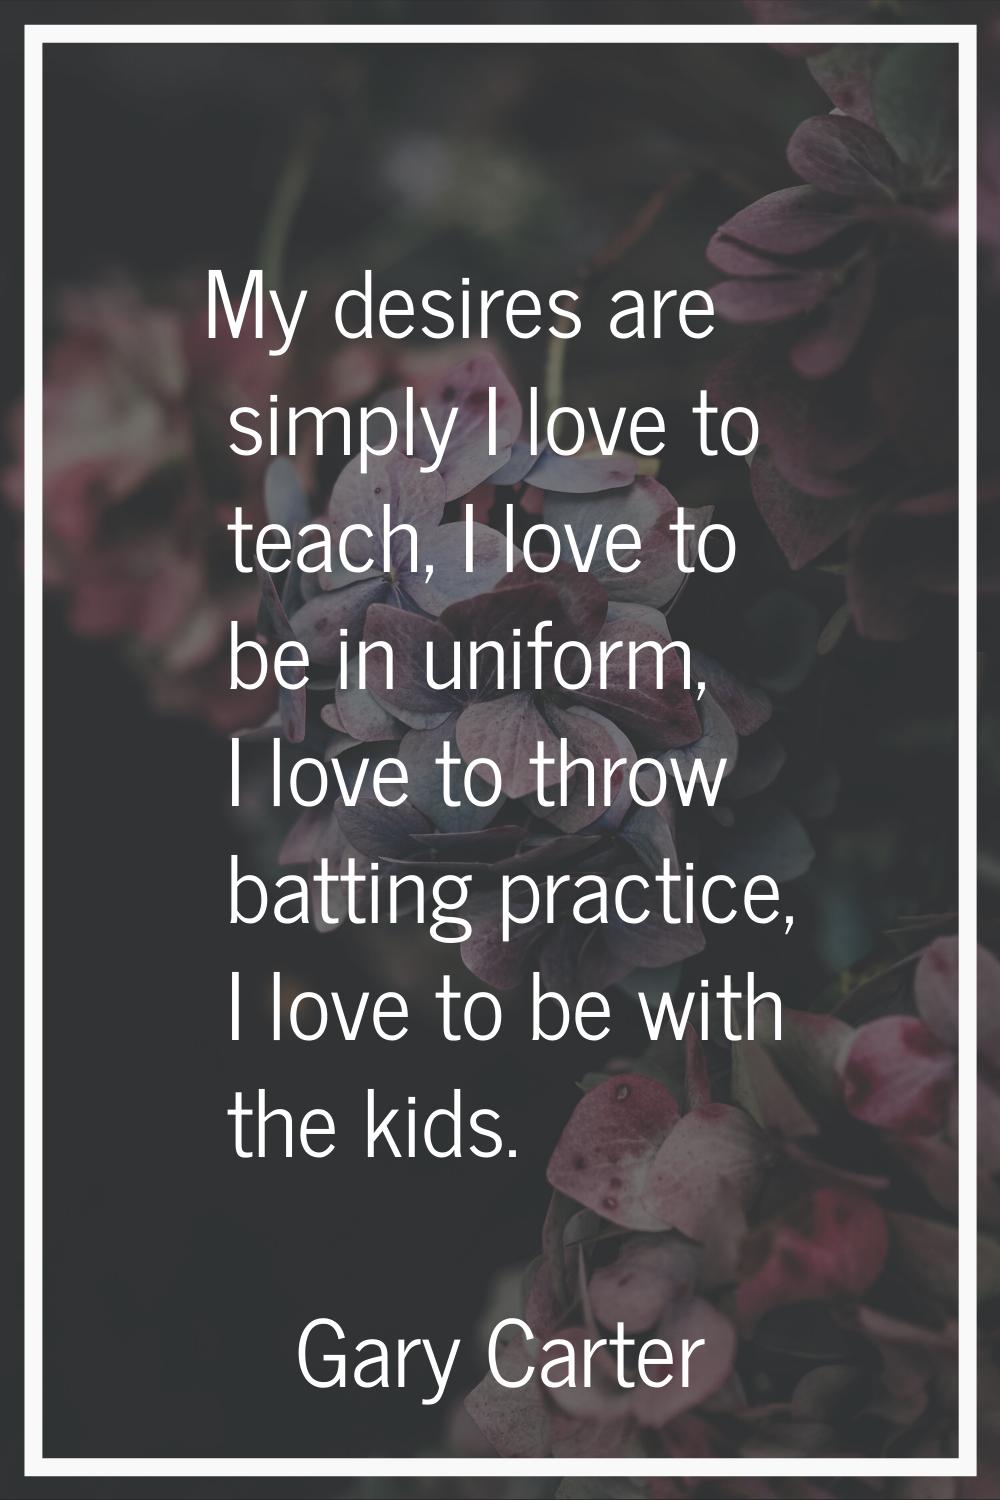 My desires are simply I love to teach, I love to be in uniform, I love to throw batting practice, I